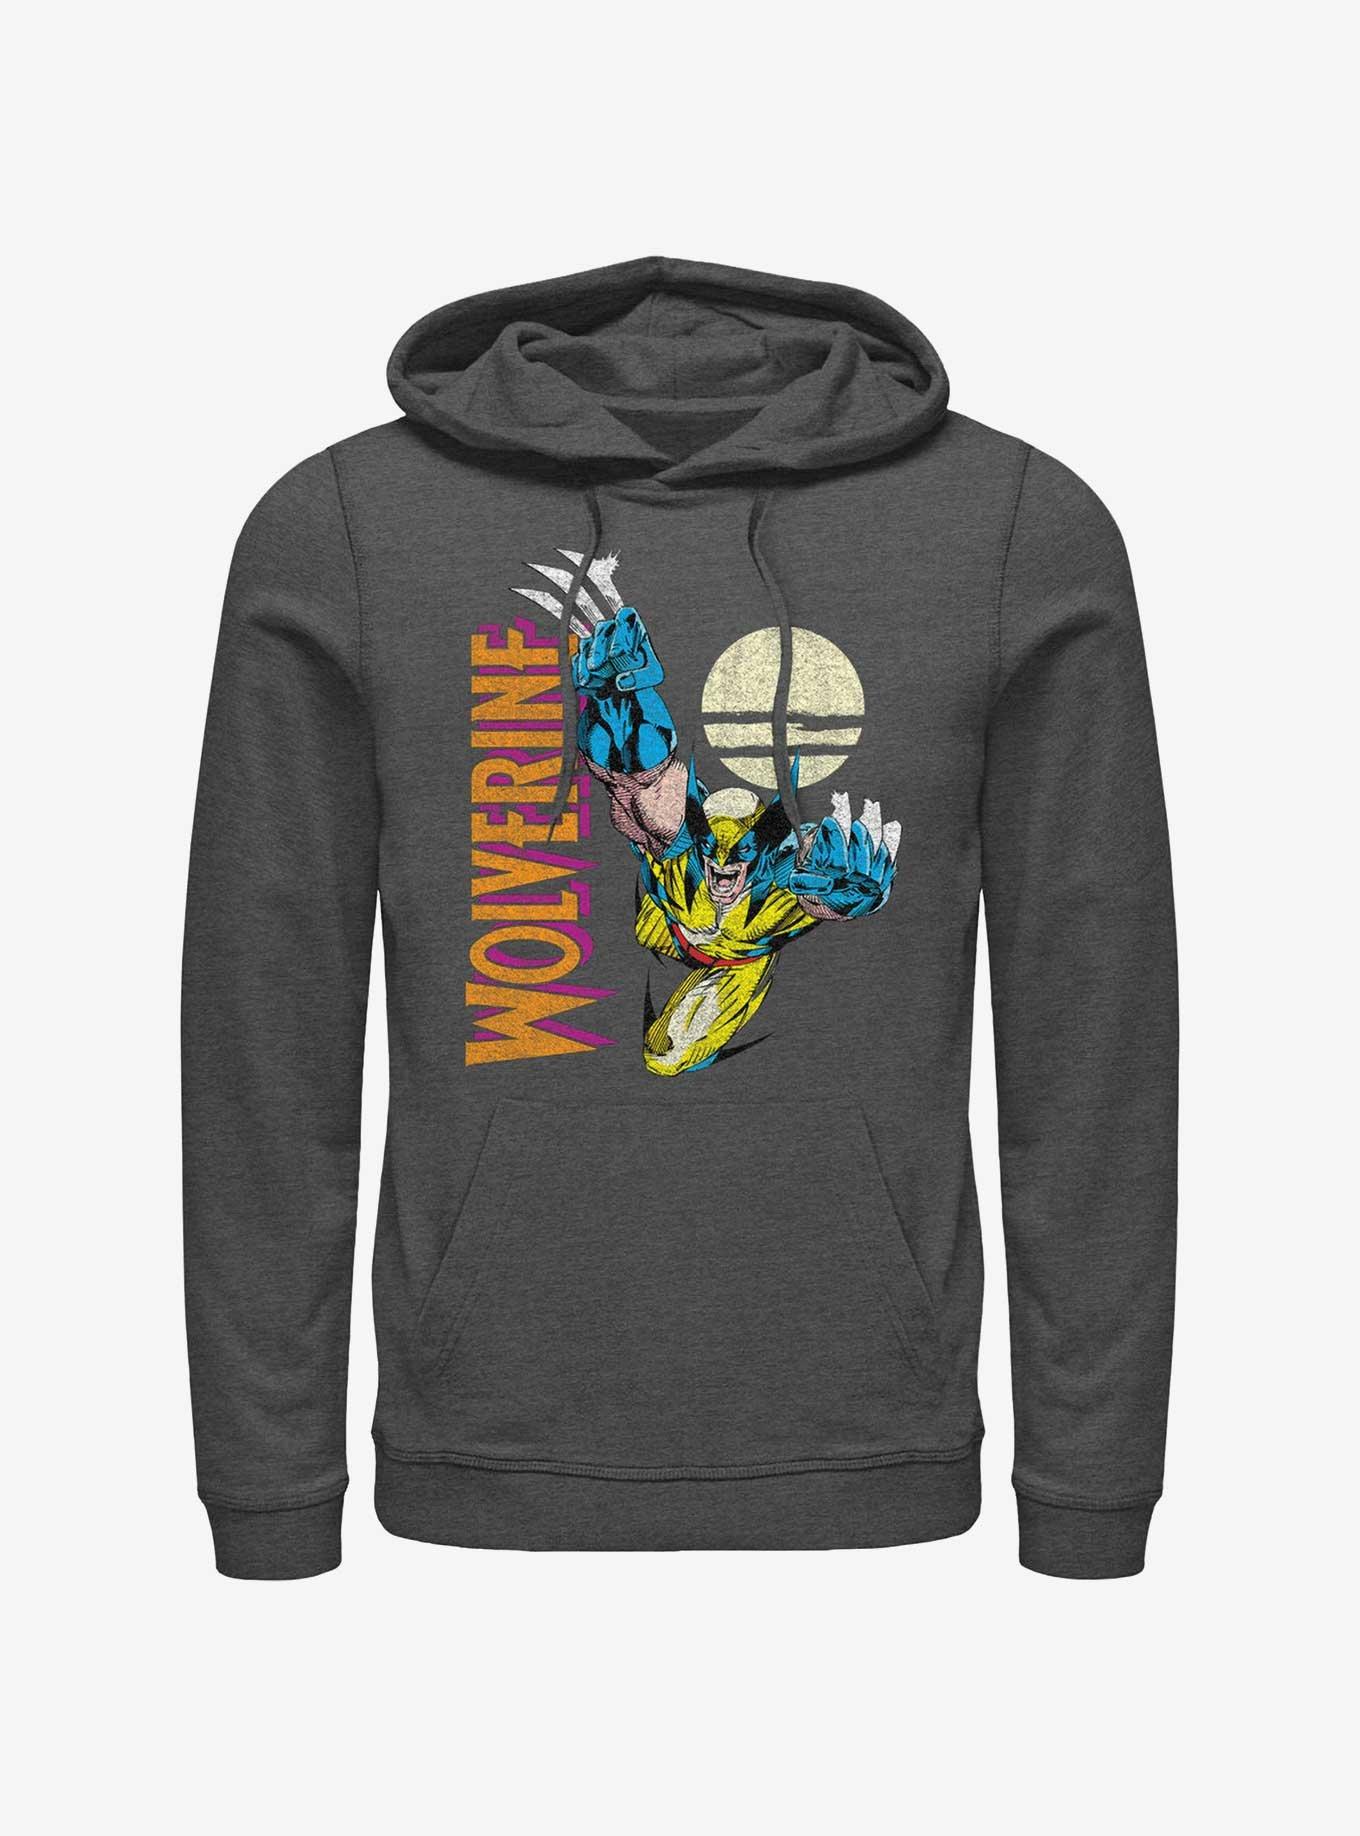 Wolverine Pounce At Night Hoodie, CHAR HTR, hi-res